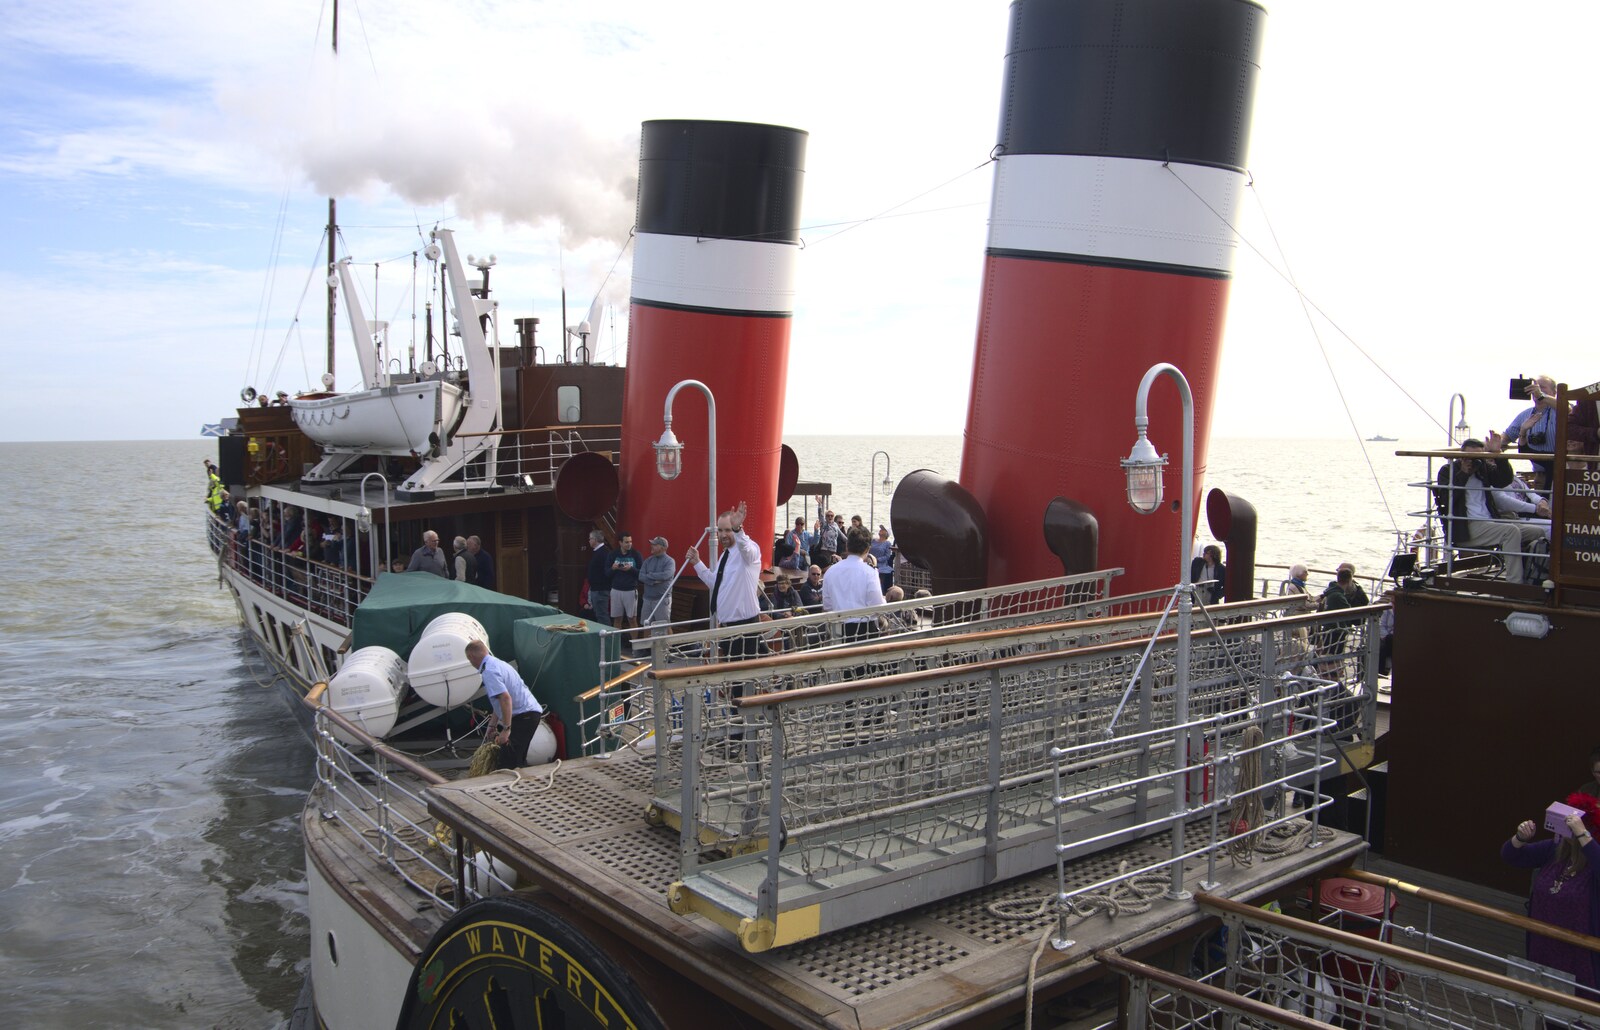 The steamer sets sail from The Waverley Paddle Steamer at Southwold Pier, Suffolk - 27th September 2023